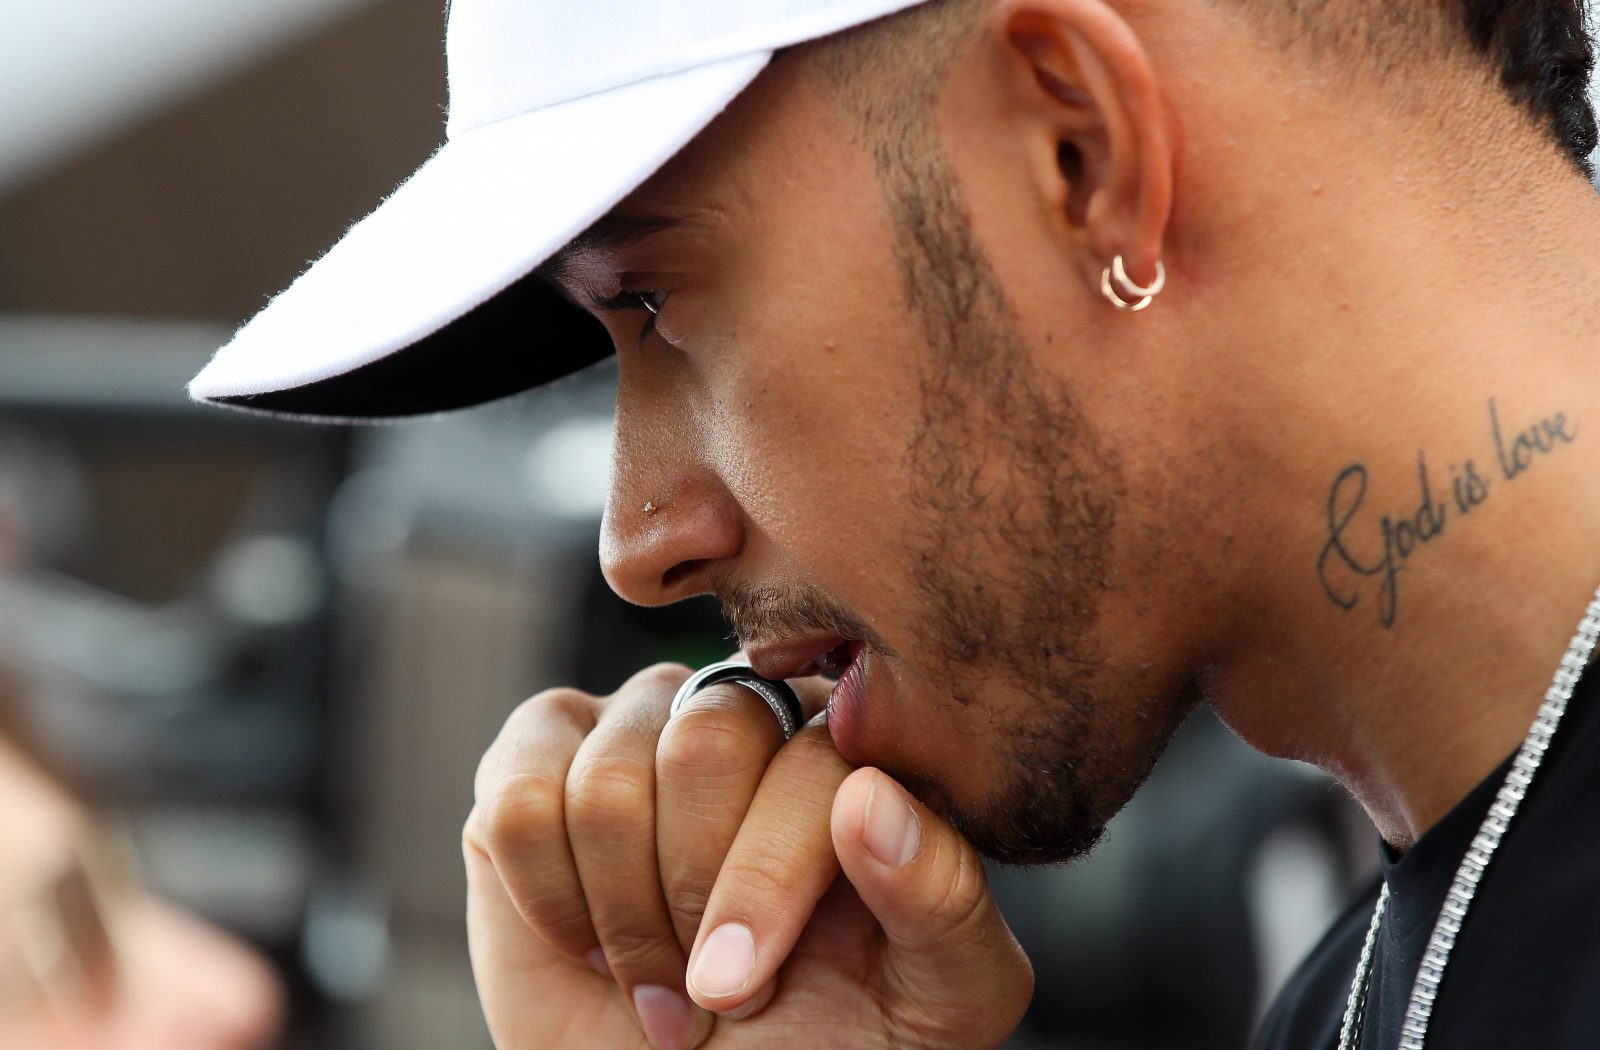 Lewis Hamilton - GEPA pictures/Red Bull Content Pool